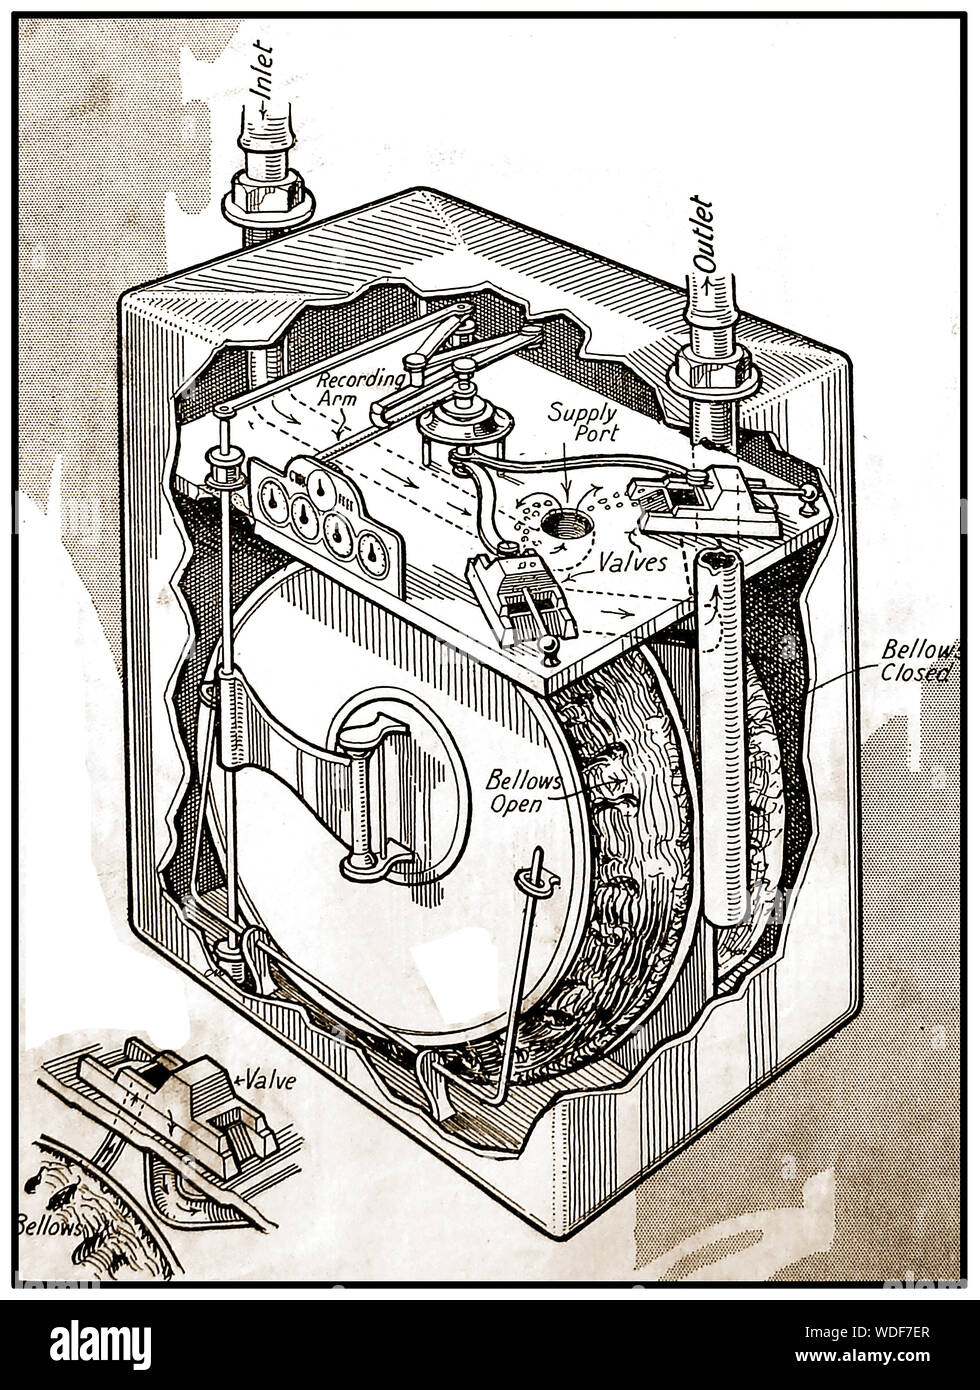 A 1933 gas meter illustration showing its internal working parts Stock Photo